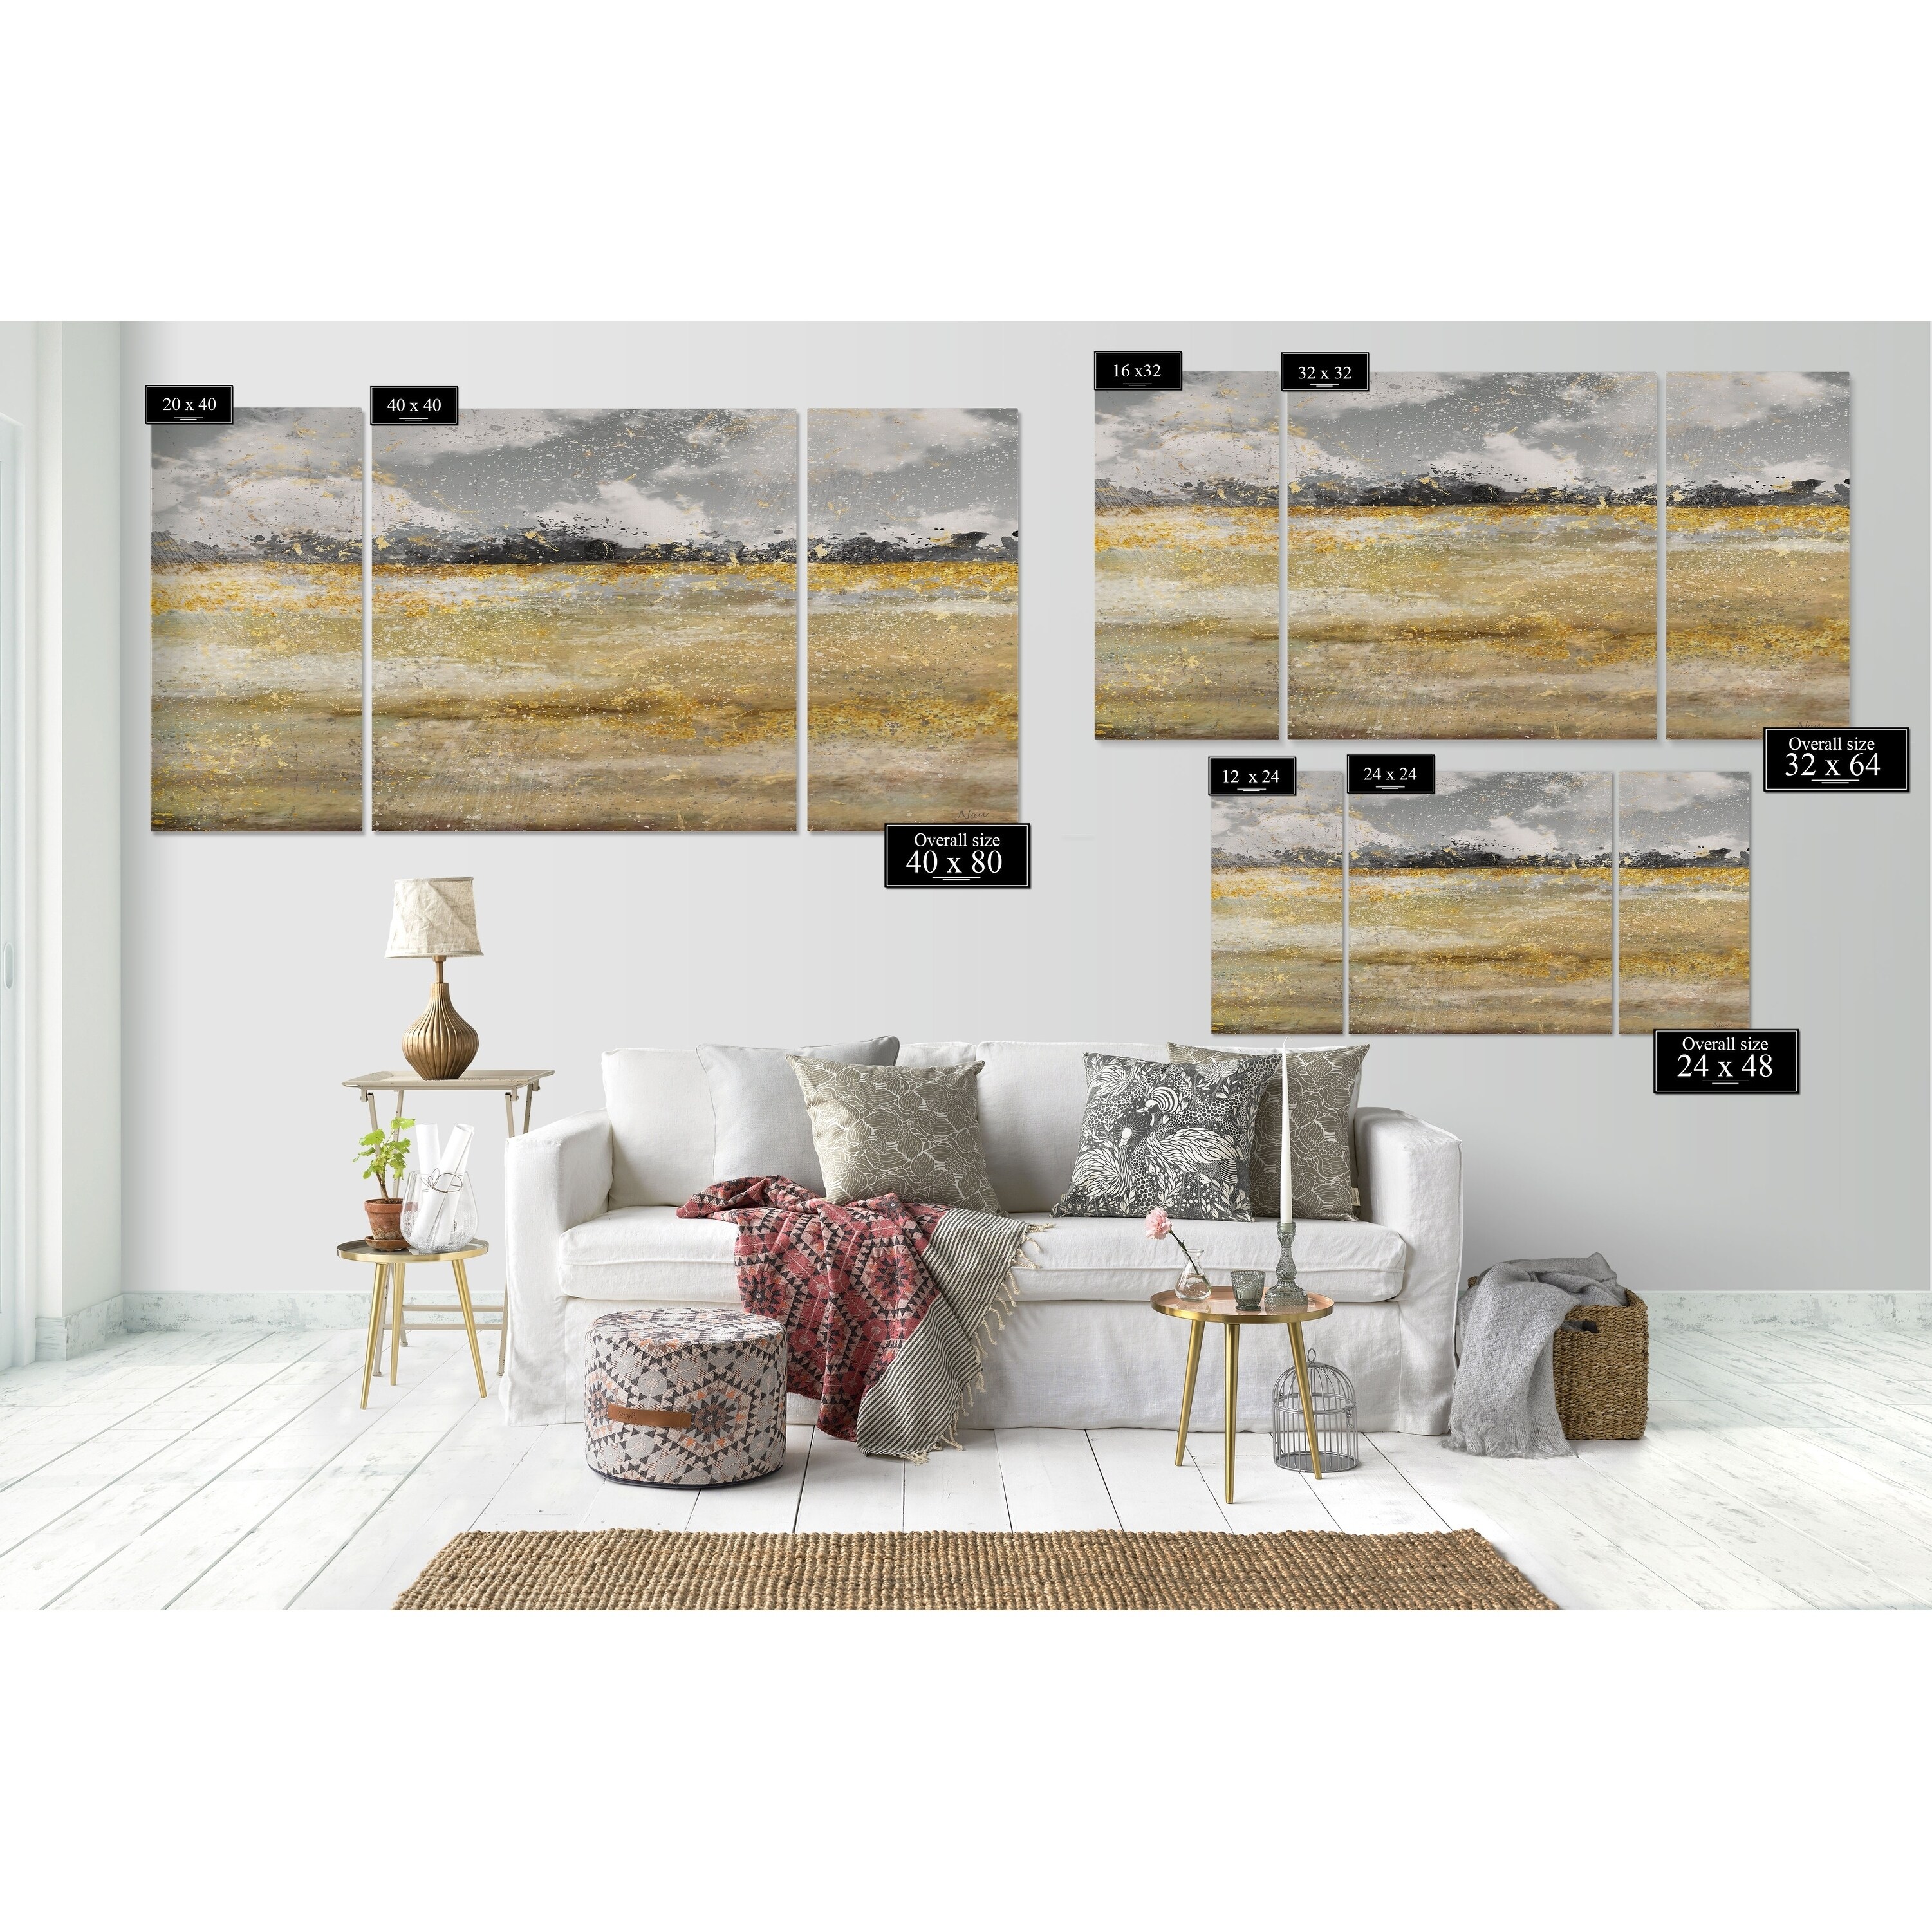 Wexford Home Abstract Wall Art Watercolor Canvas Prints Modern Artwork dcor for Living Room Bathroom Bedroom 32x 32 Inches, Set of 4, Size: 32 x 32